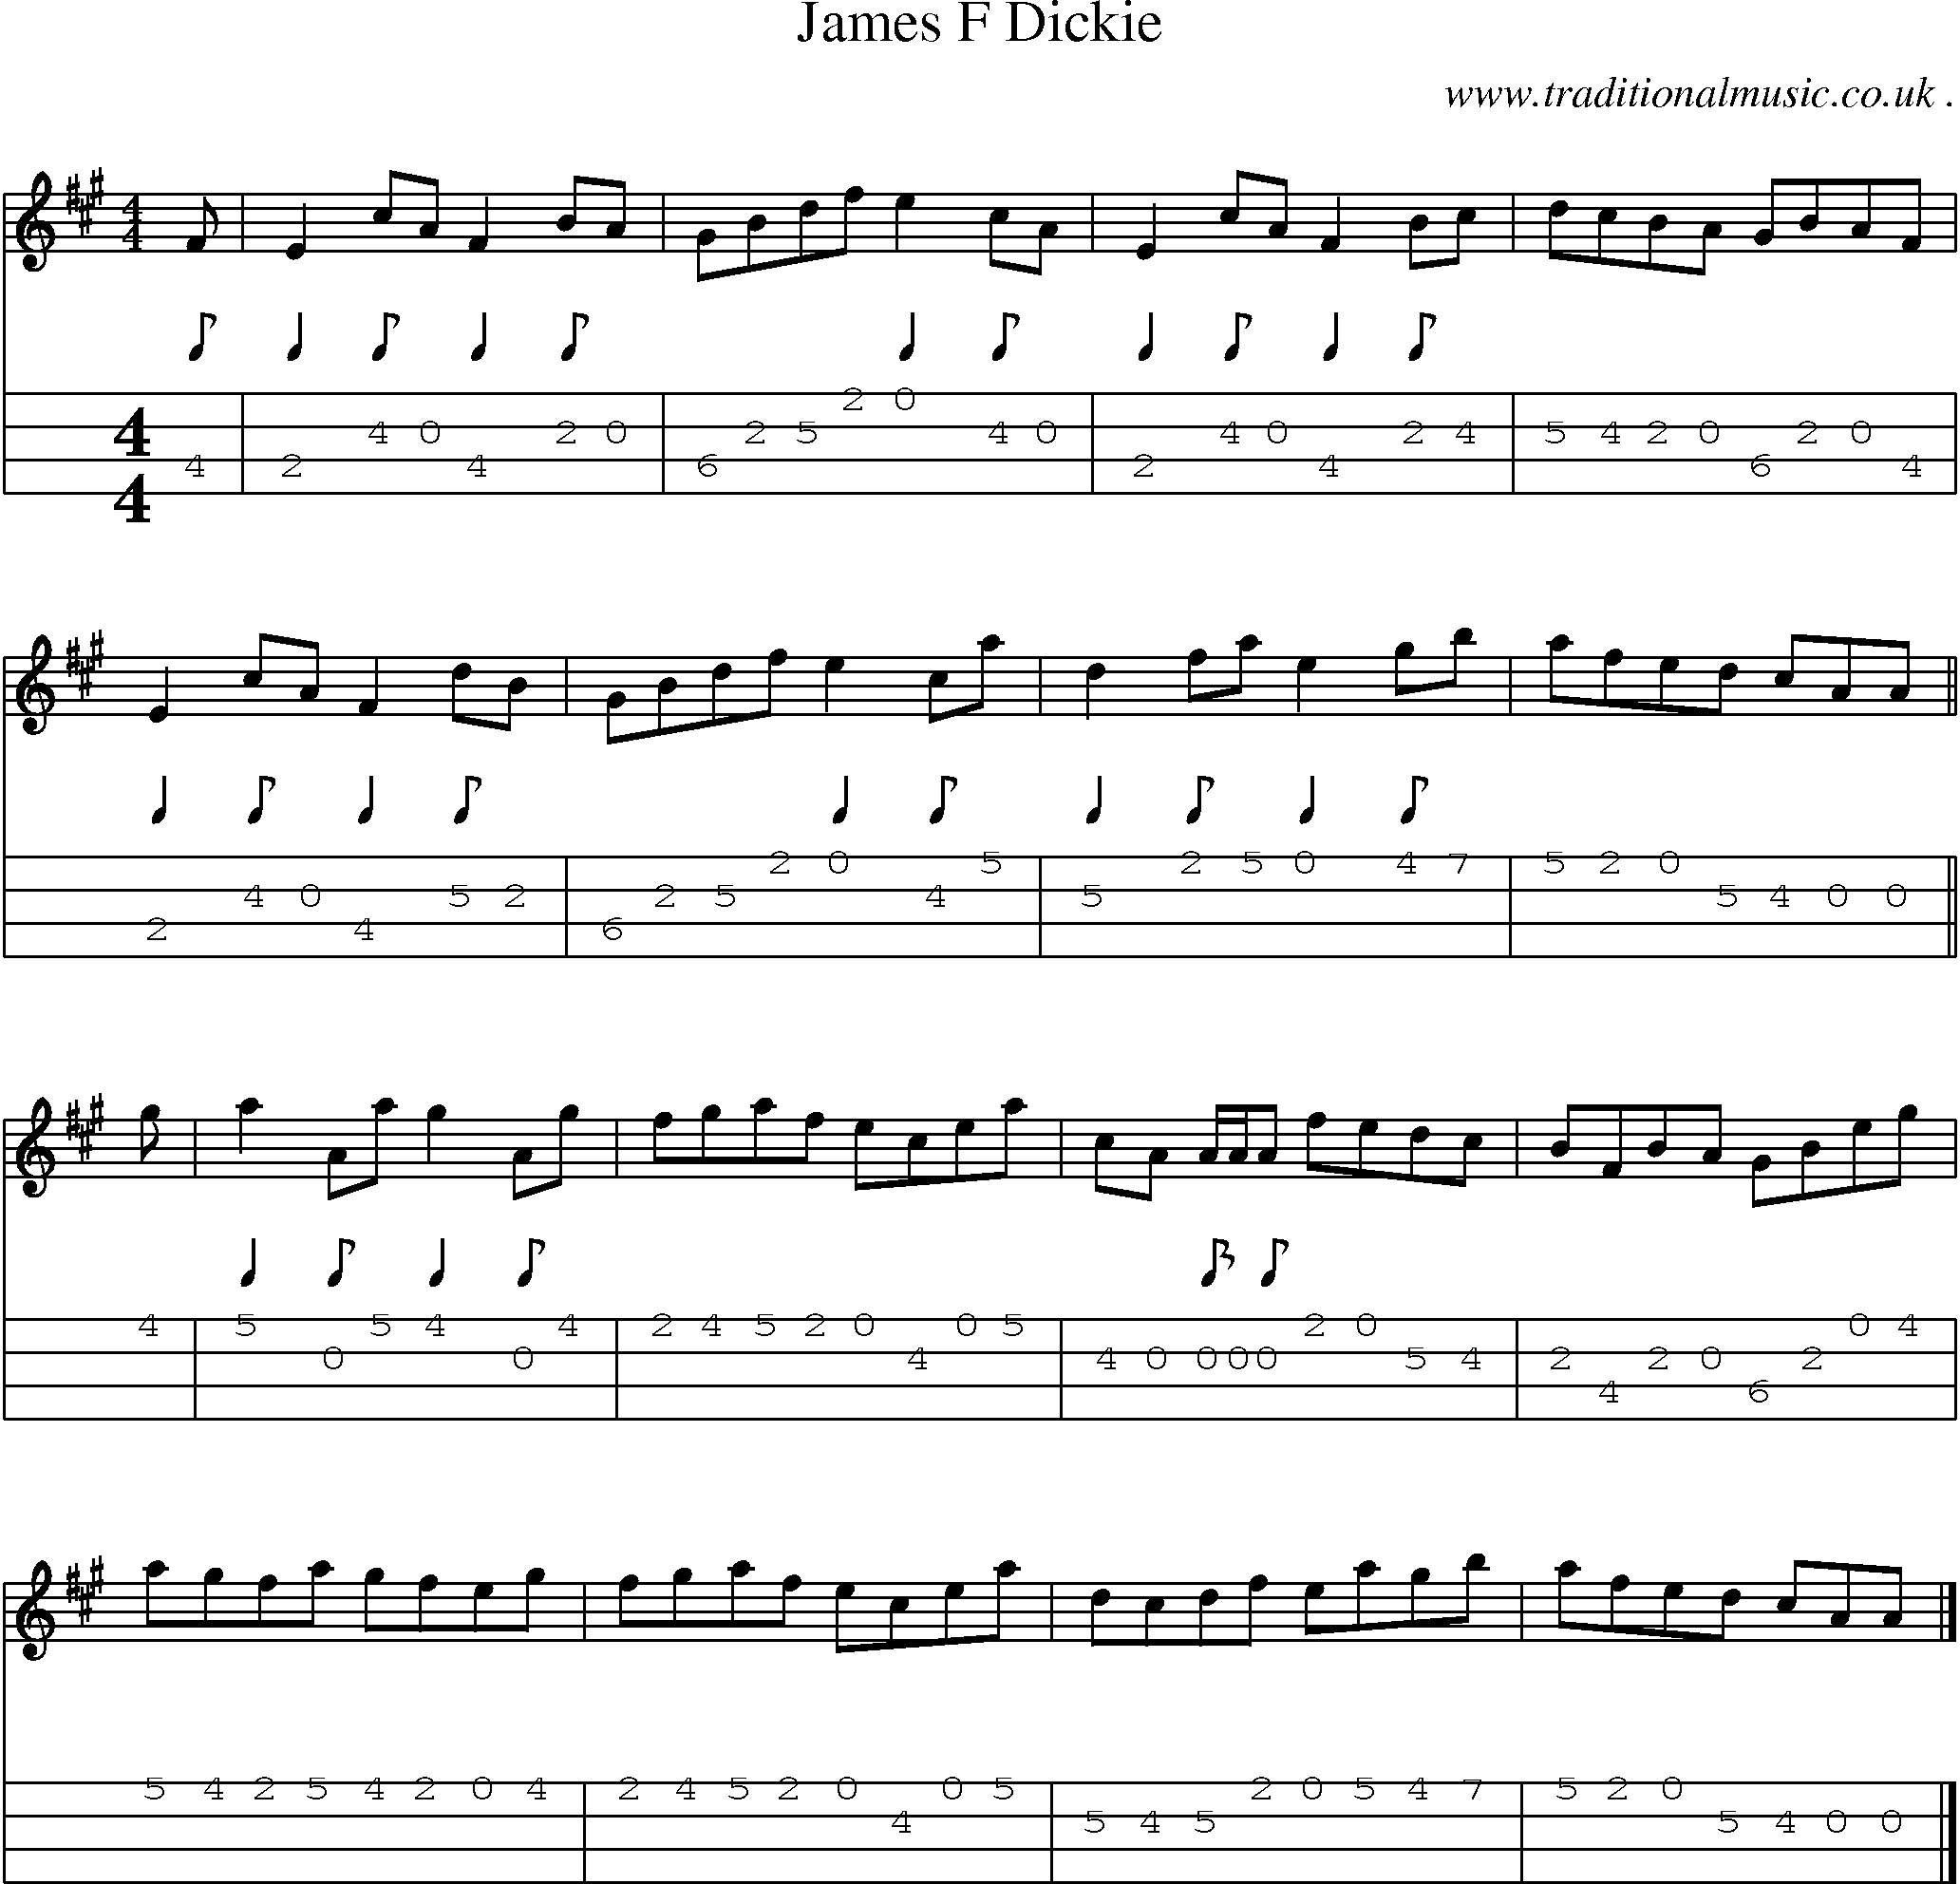 Sheet-music  score, Chords and Mandolin Tabs for James F Dickie